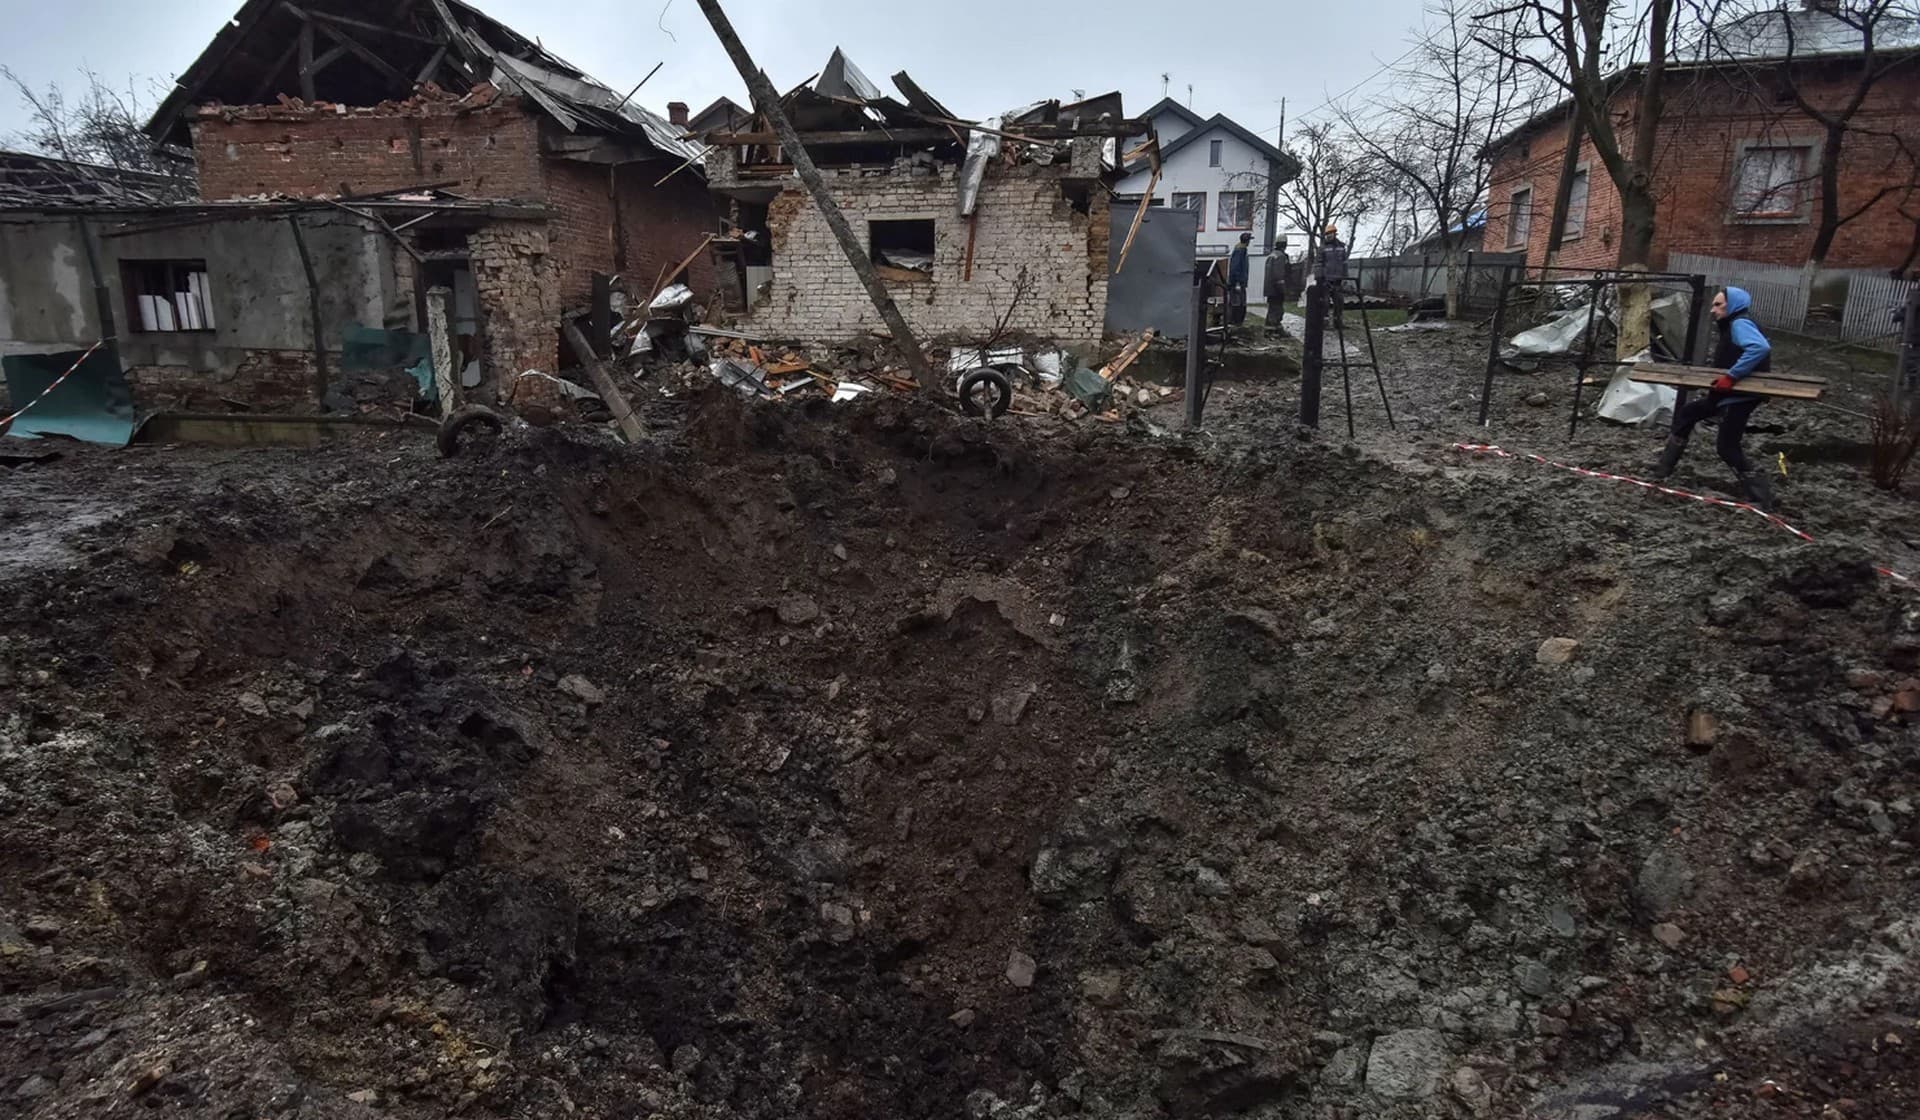 A crater at a site of a residential area damaged by a Russian missile strike in Lviv